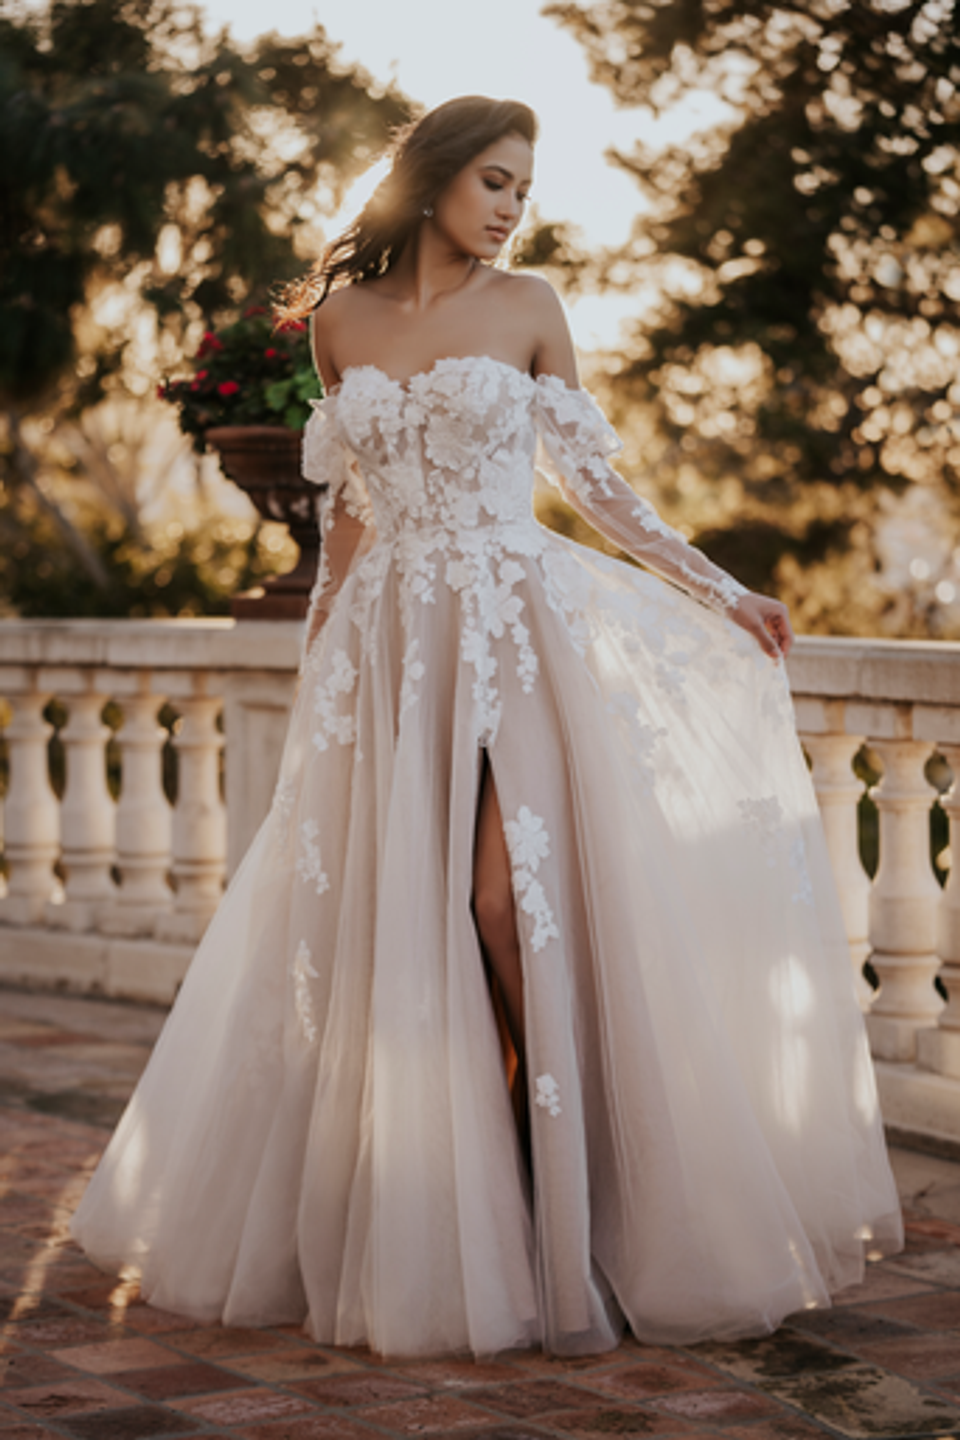 R3650SL-Allure Bridal-Pure Bridal-Blowsy dimensional sequined lace covers this gown's romantic, strapless sweetheart bodice.Detachable sheer sleeves add a gorgeous accent-Edmonton Bridal Shop-Edmonton Wedding Shop-Edmonton Wedding gown dress